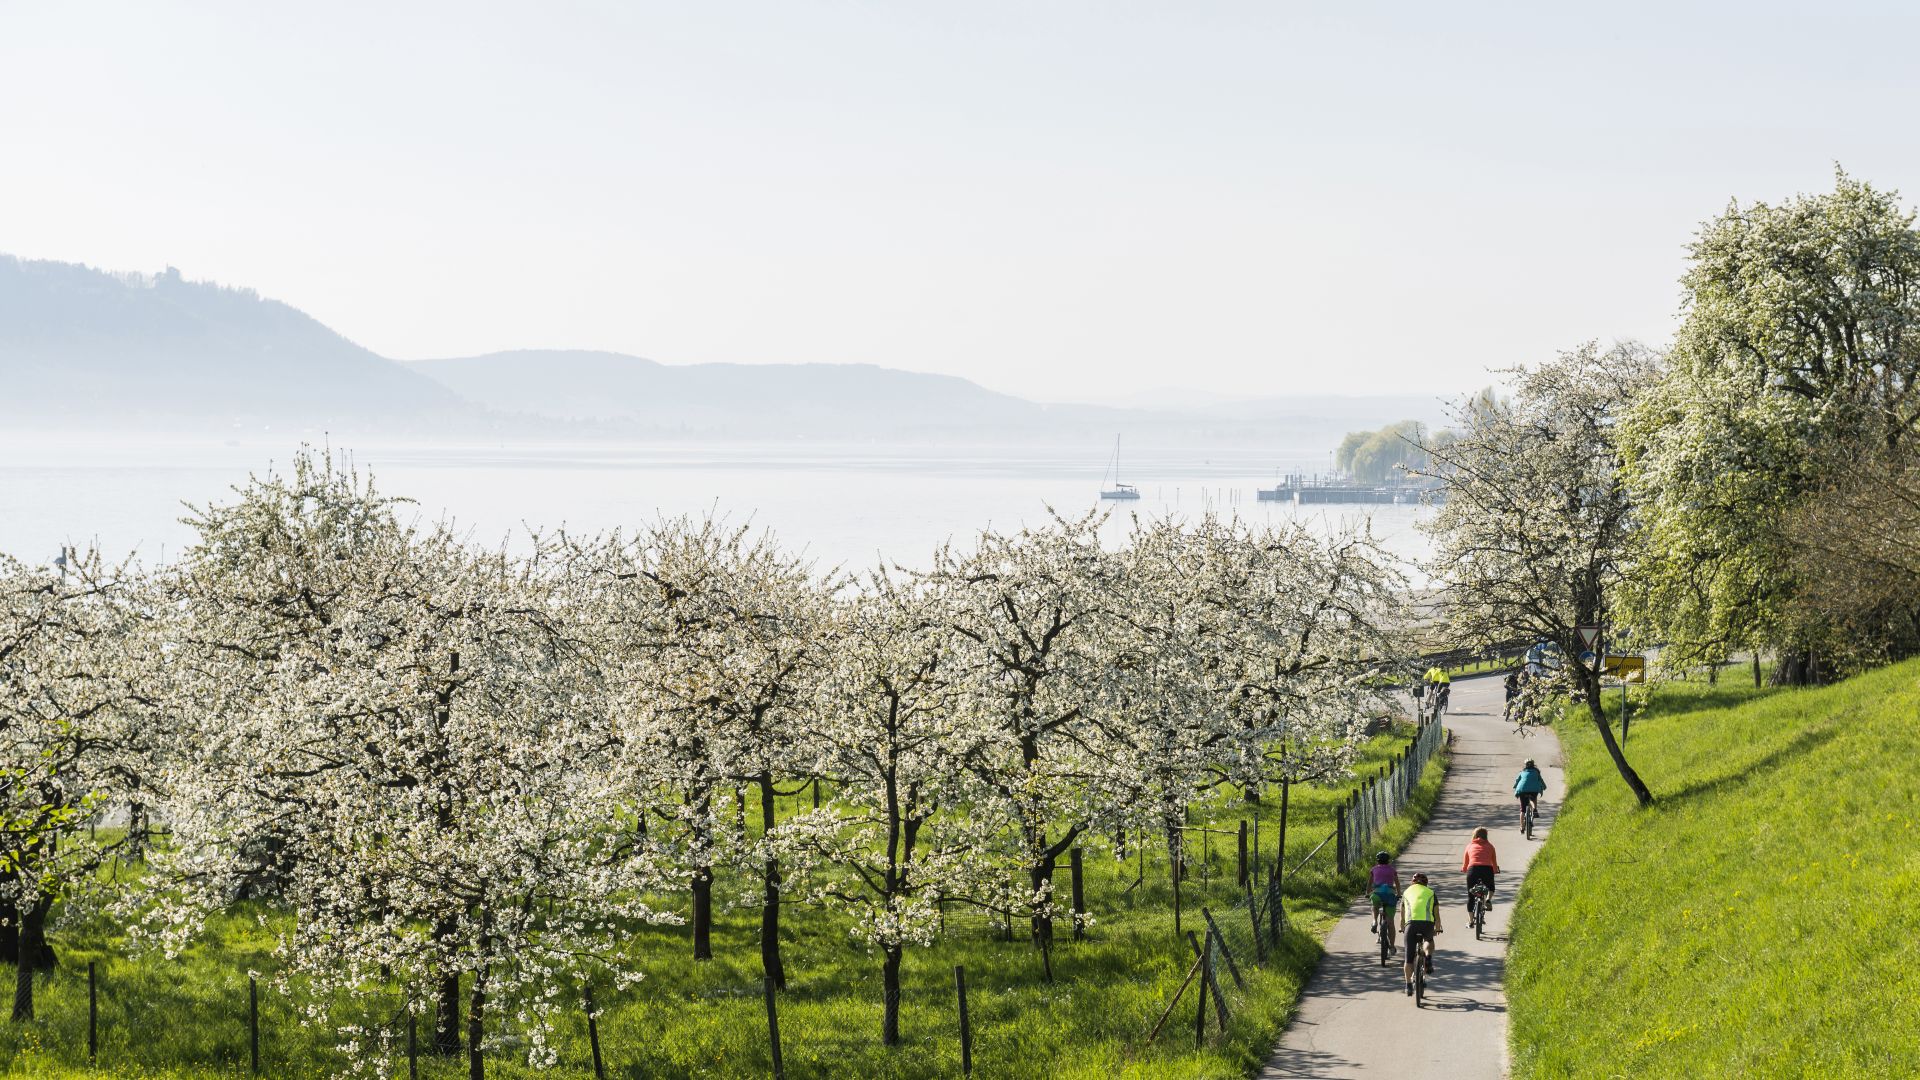 Sipplingen: Cycling through through flowering orchards at Lake Constance